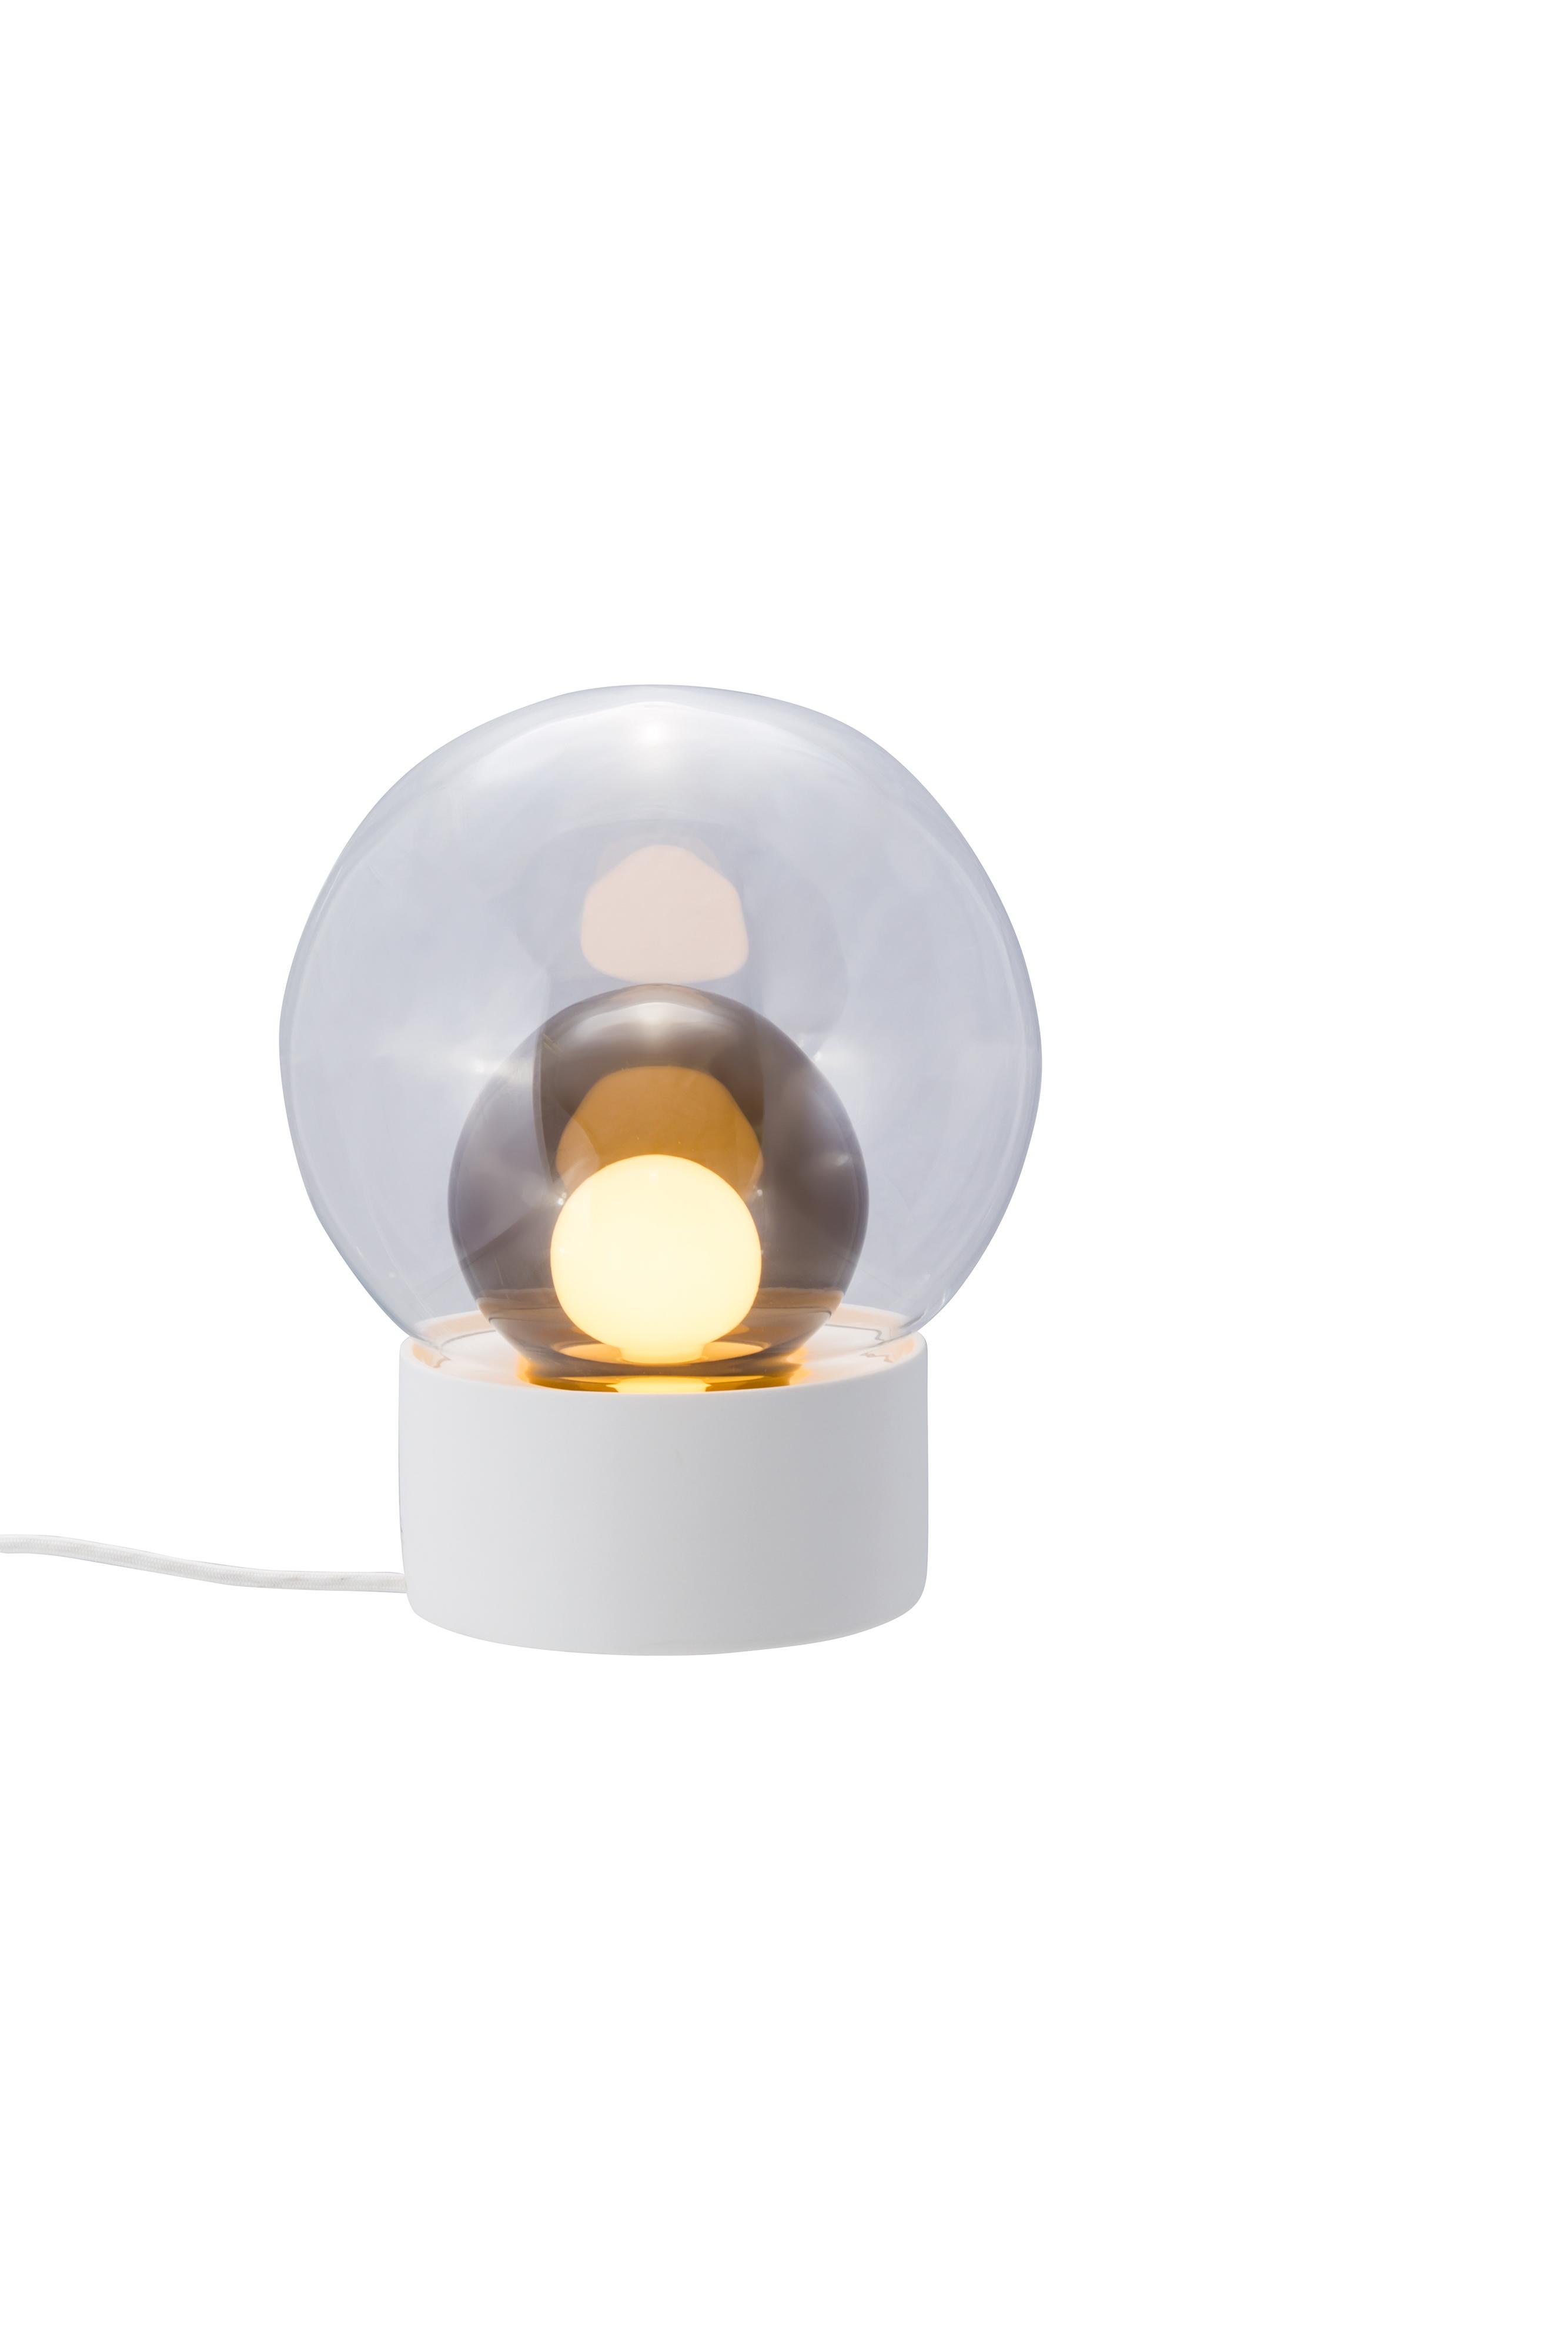 Boule Small Transparent Smoky Grey White Table Lamp by Pulpo
Dimensions: D29 x H35.5 cm
Materials: ceramic, handblown glass, coloured, textile.

Also available in different finishes: transparent  opal white black,  transparent  smoky grey black,